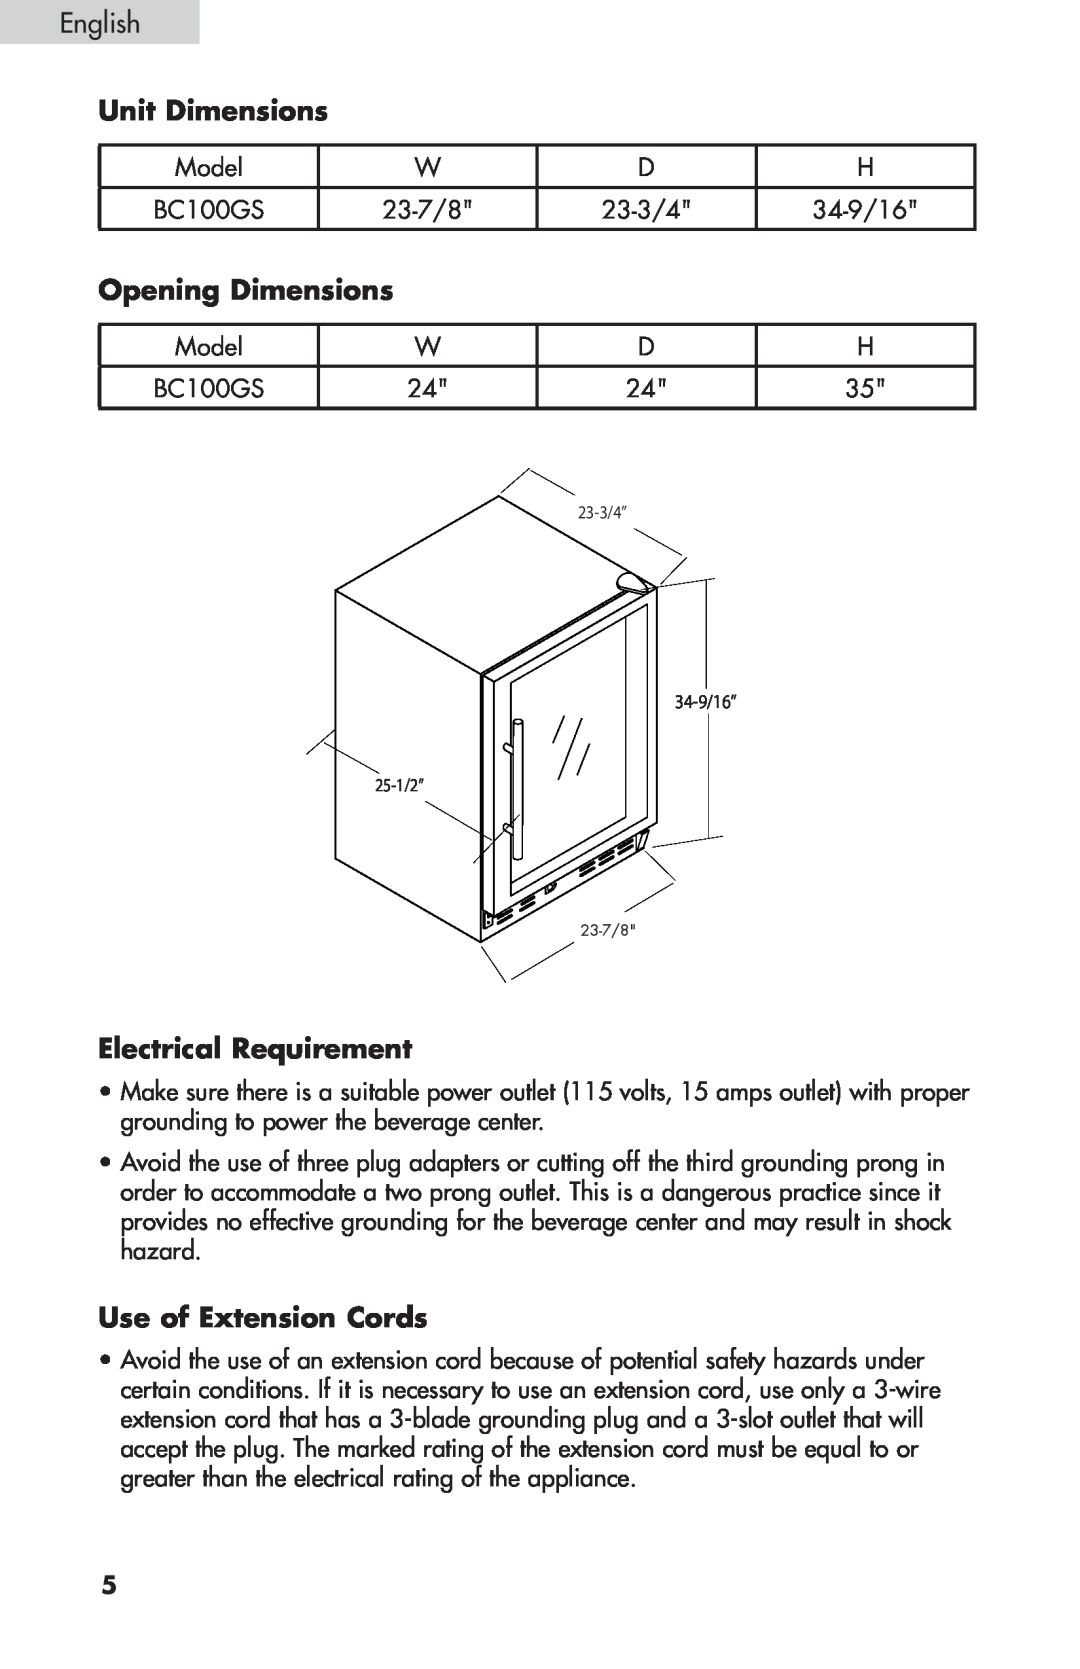 Haier BC100GS user manual Unit Dimensions, Opening Dimensions, Electrical Requirement, Use of Extension Cords, 34-9/16” 